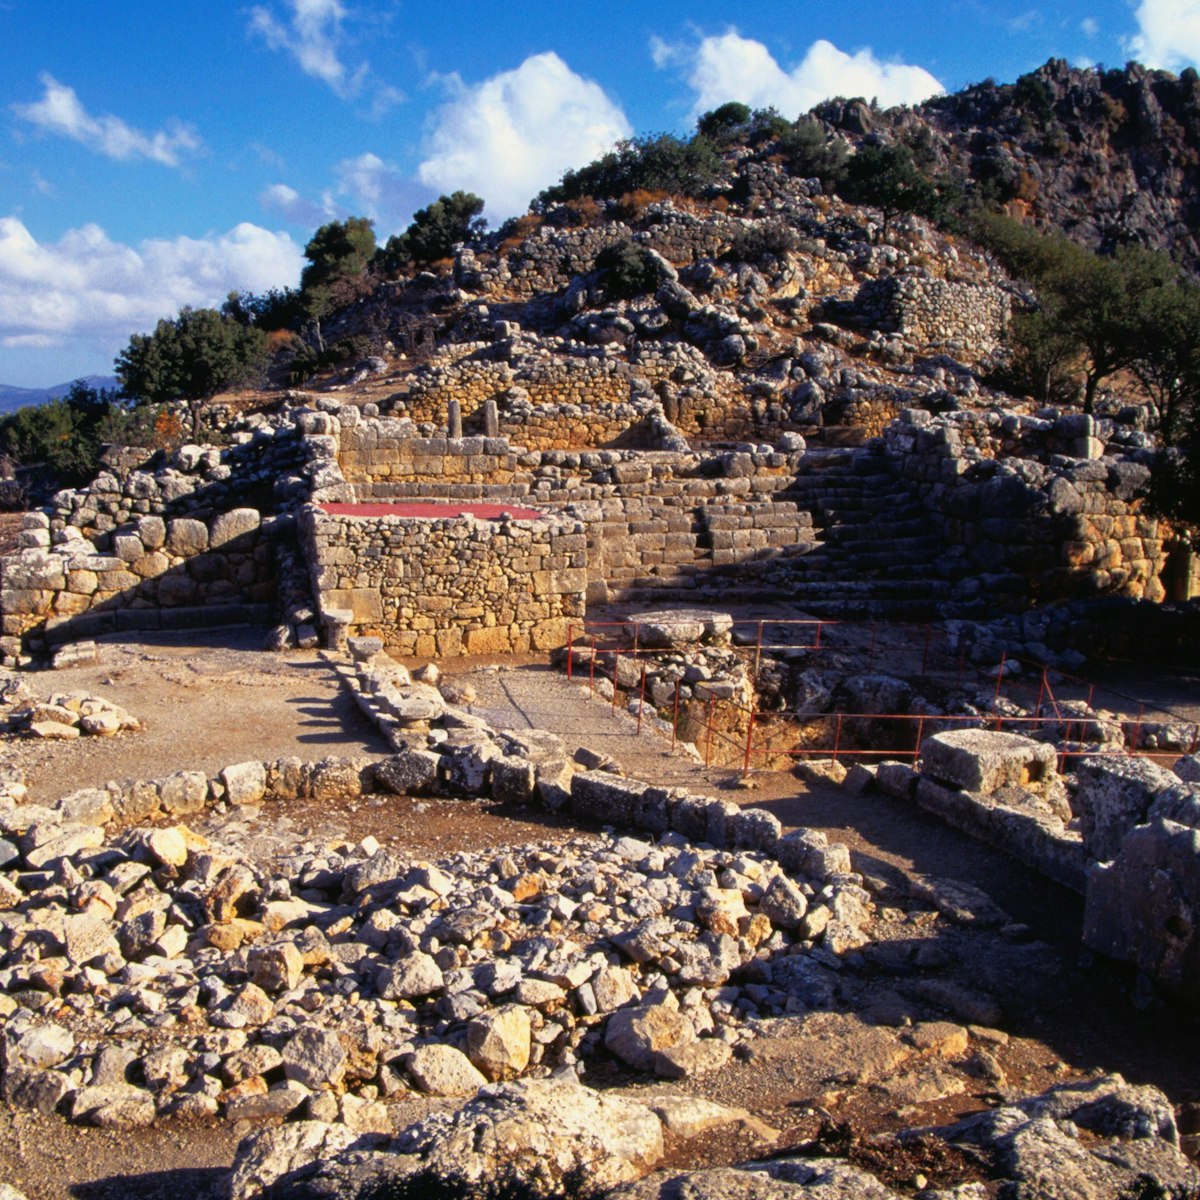 Excavations at the ancient city of Lato - Lassithi Province, Crete